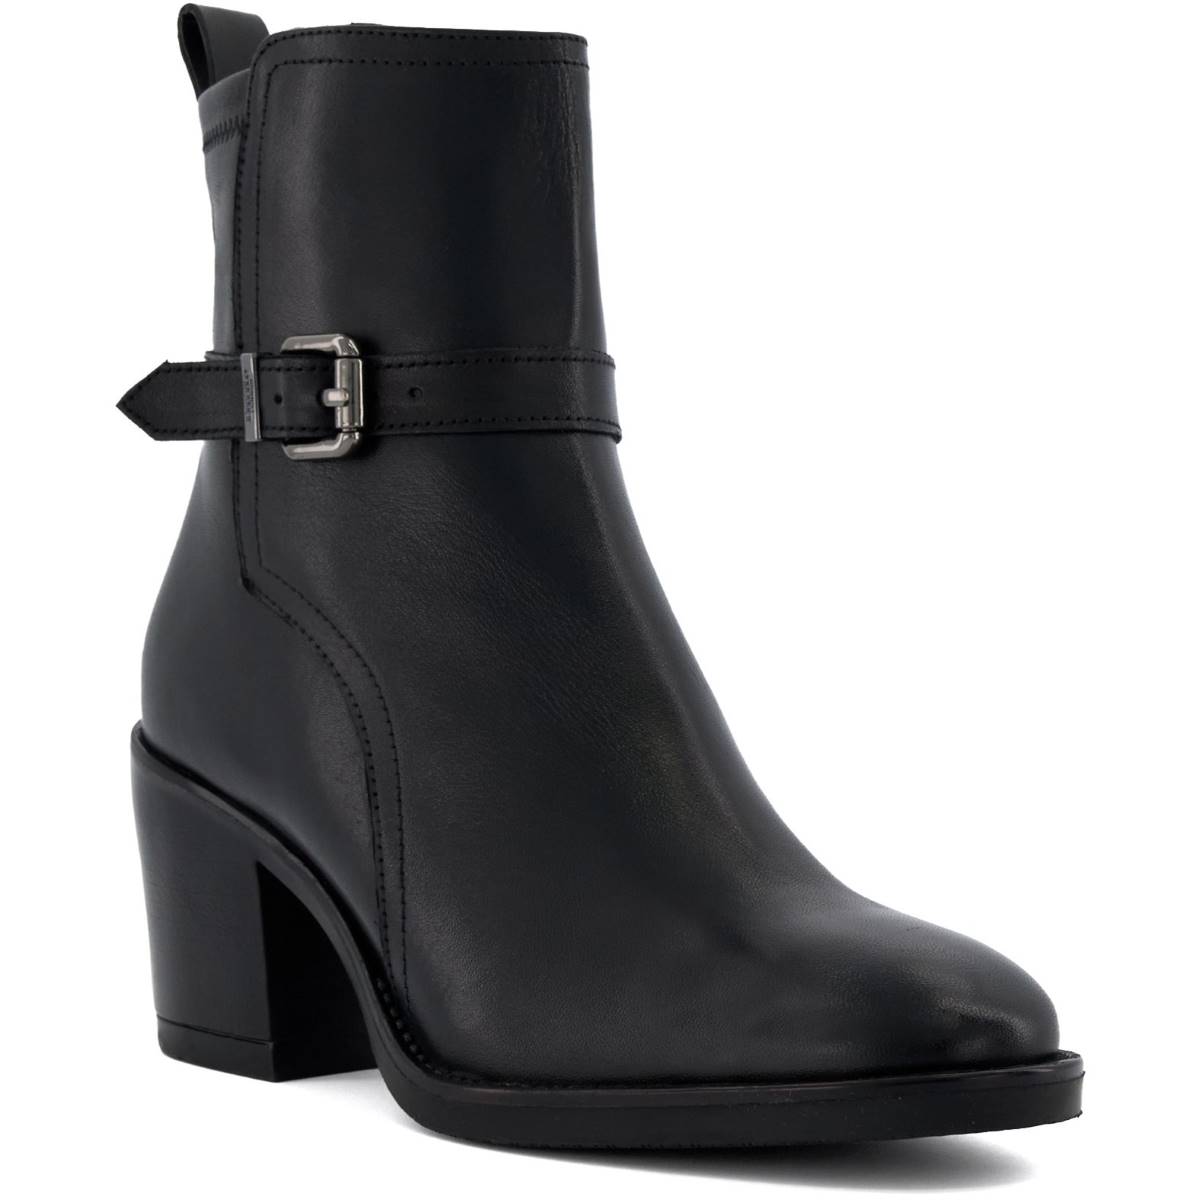 Dune London Prance Black Womens ankle boots 92506690164484 in a Plain Leather in Size 4